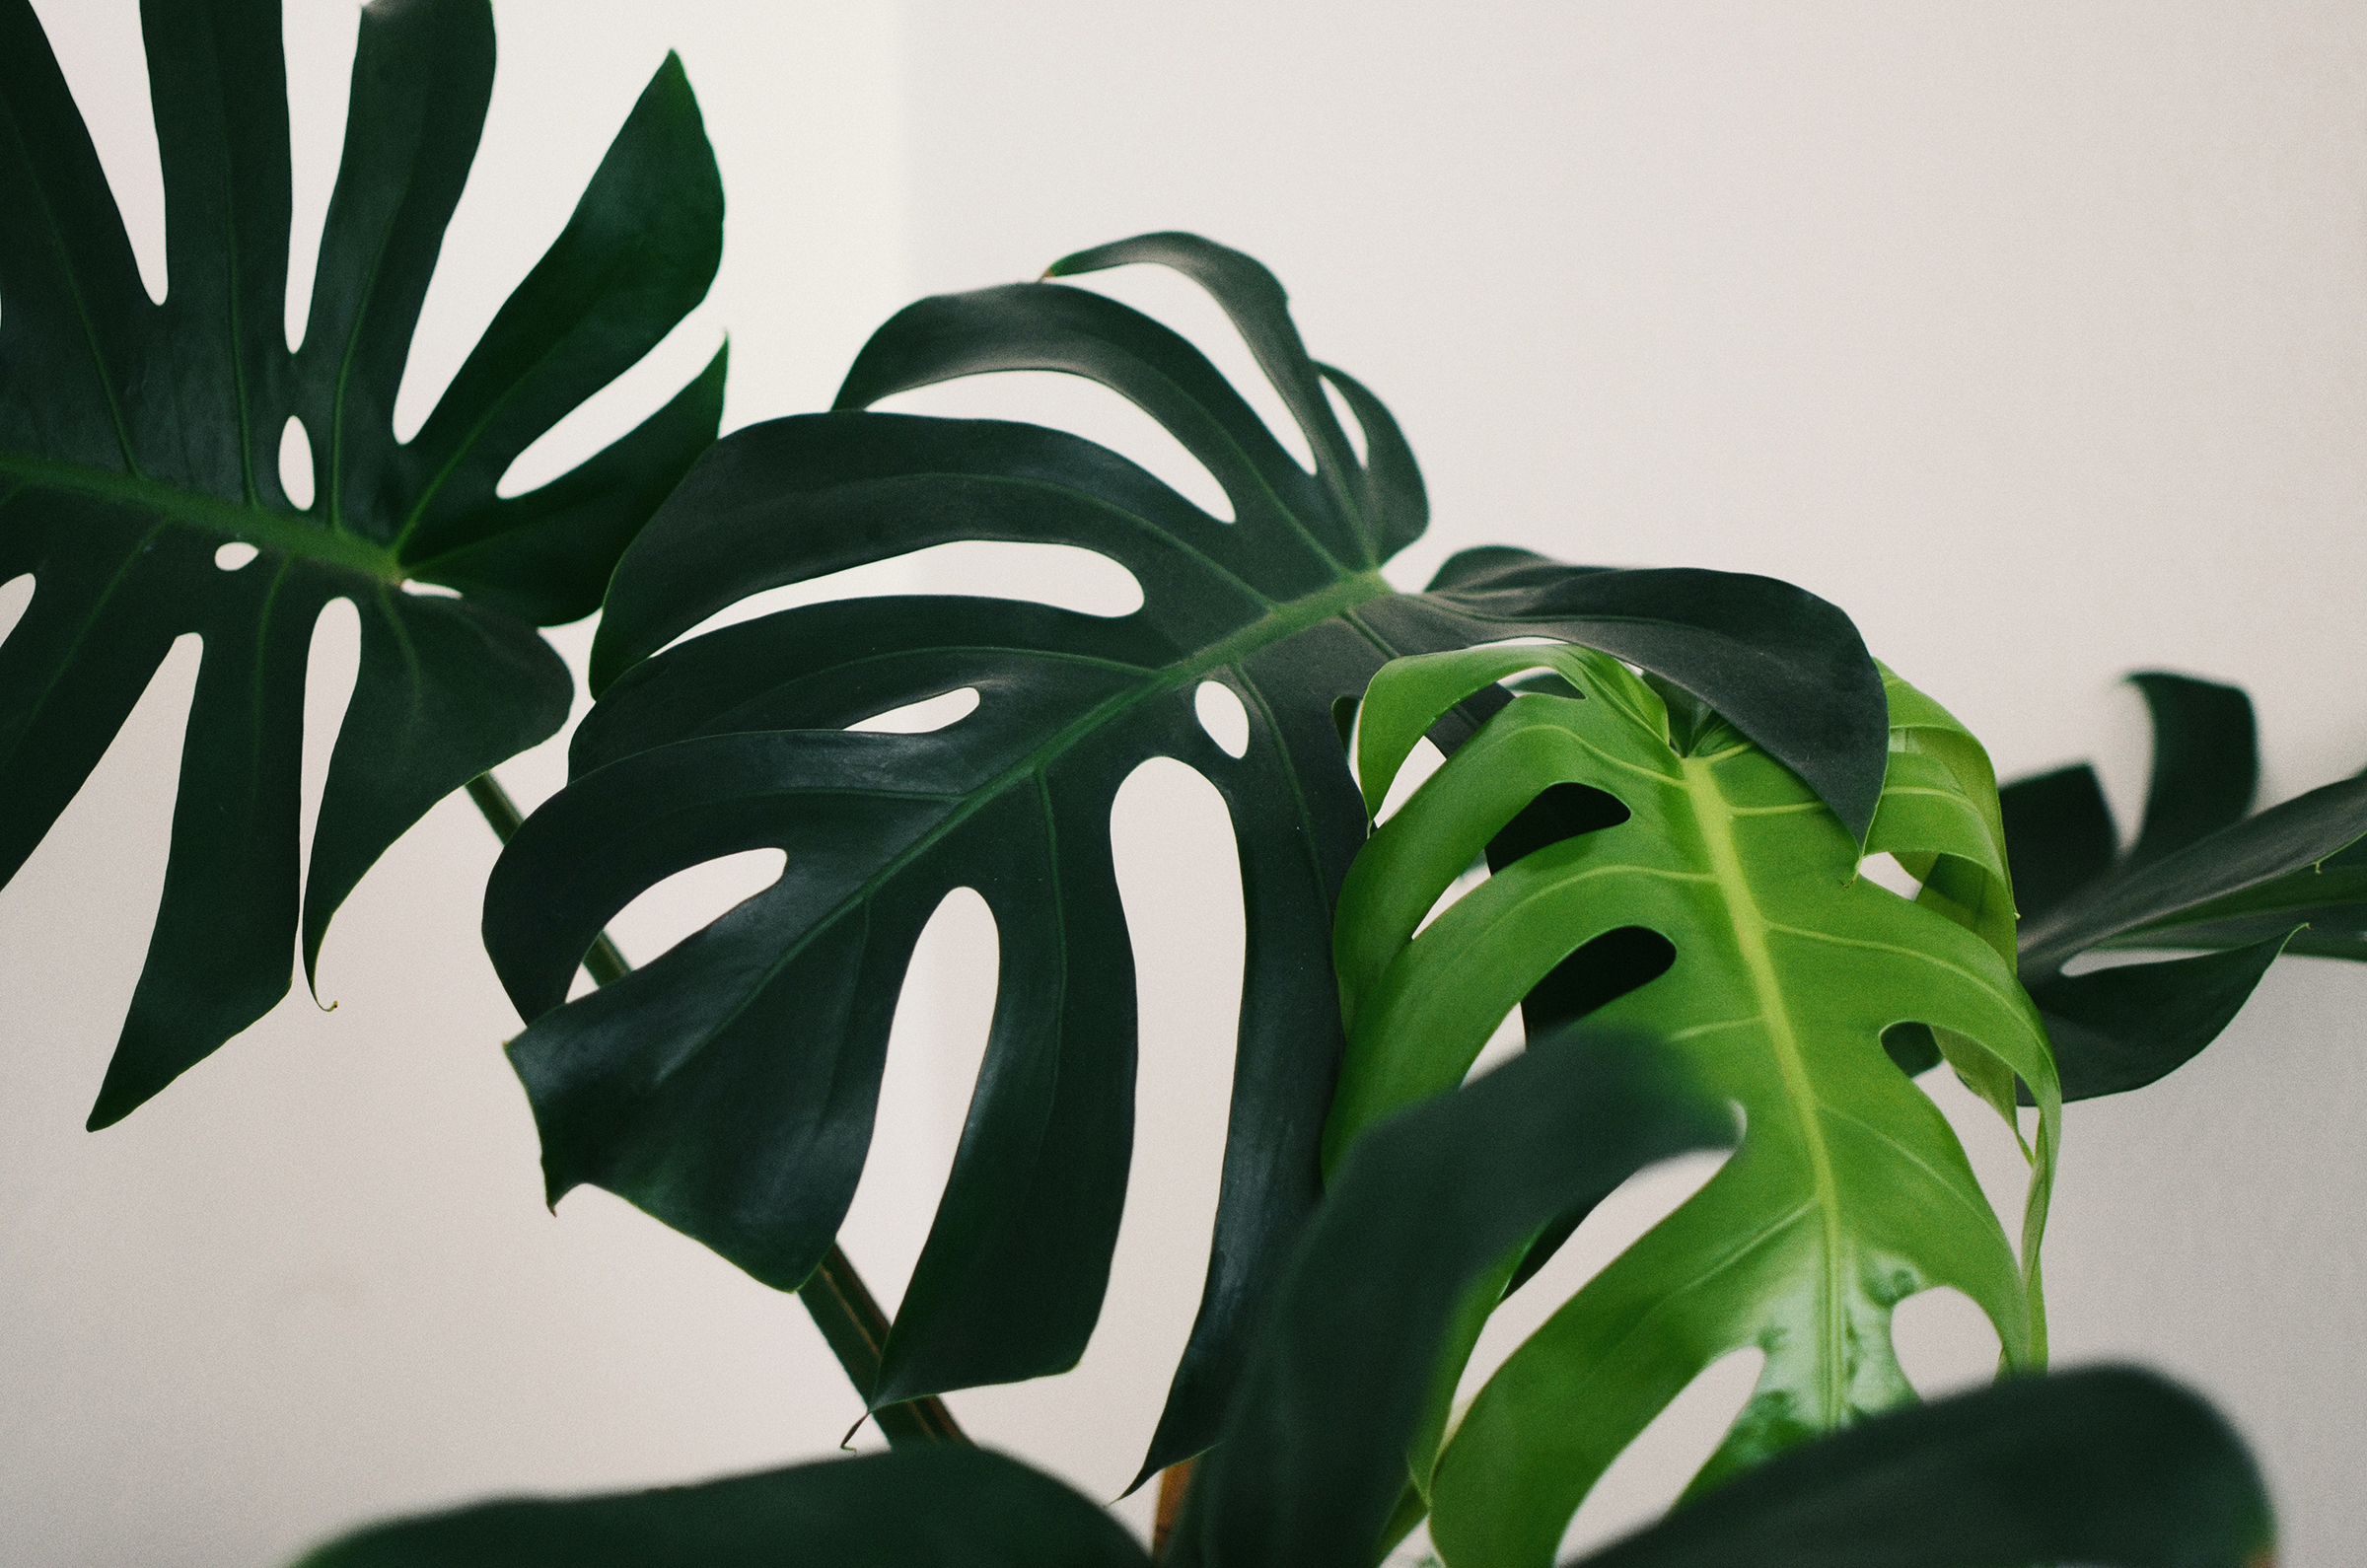 5 Major Advantages of Artificial Plants You Need to Know